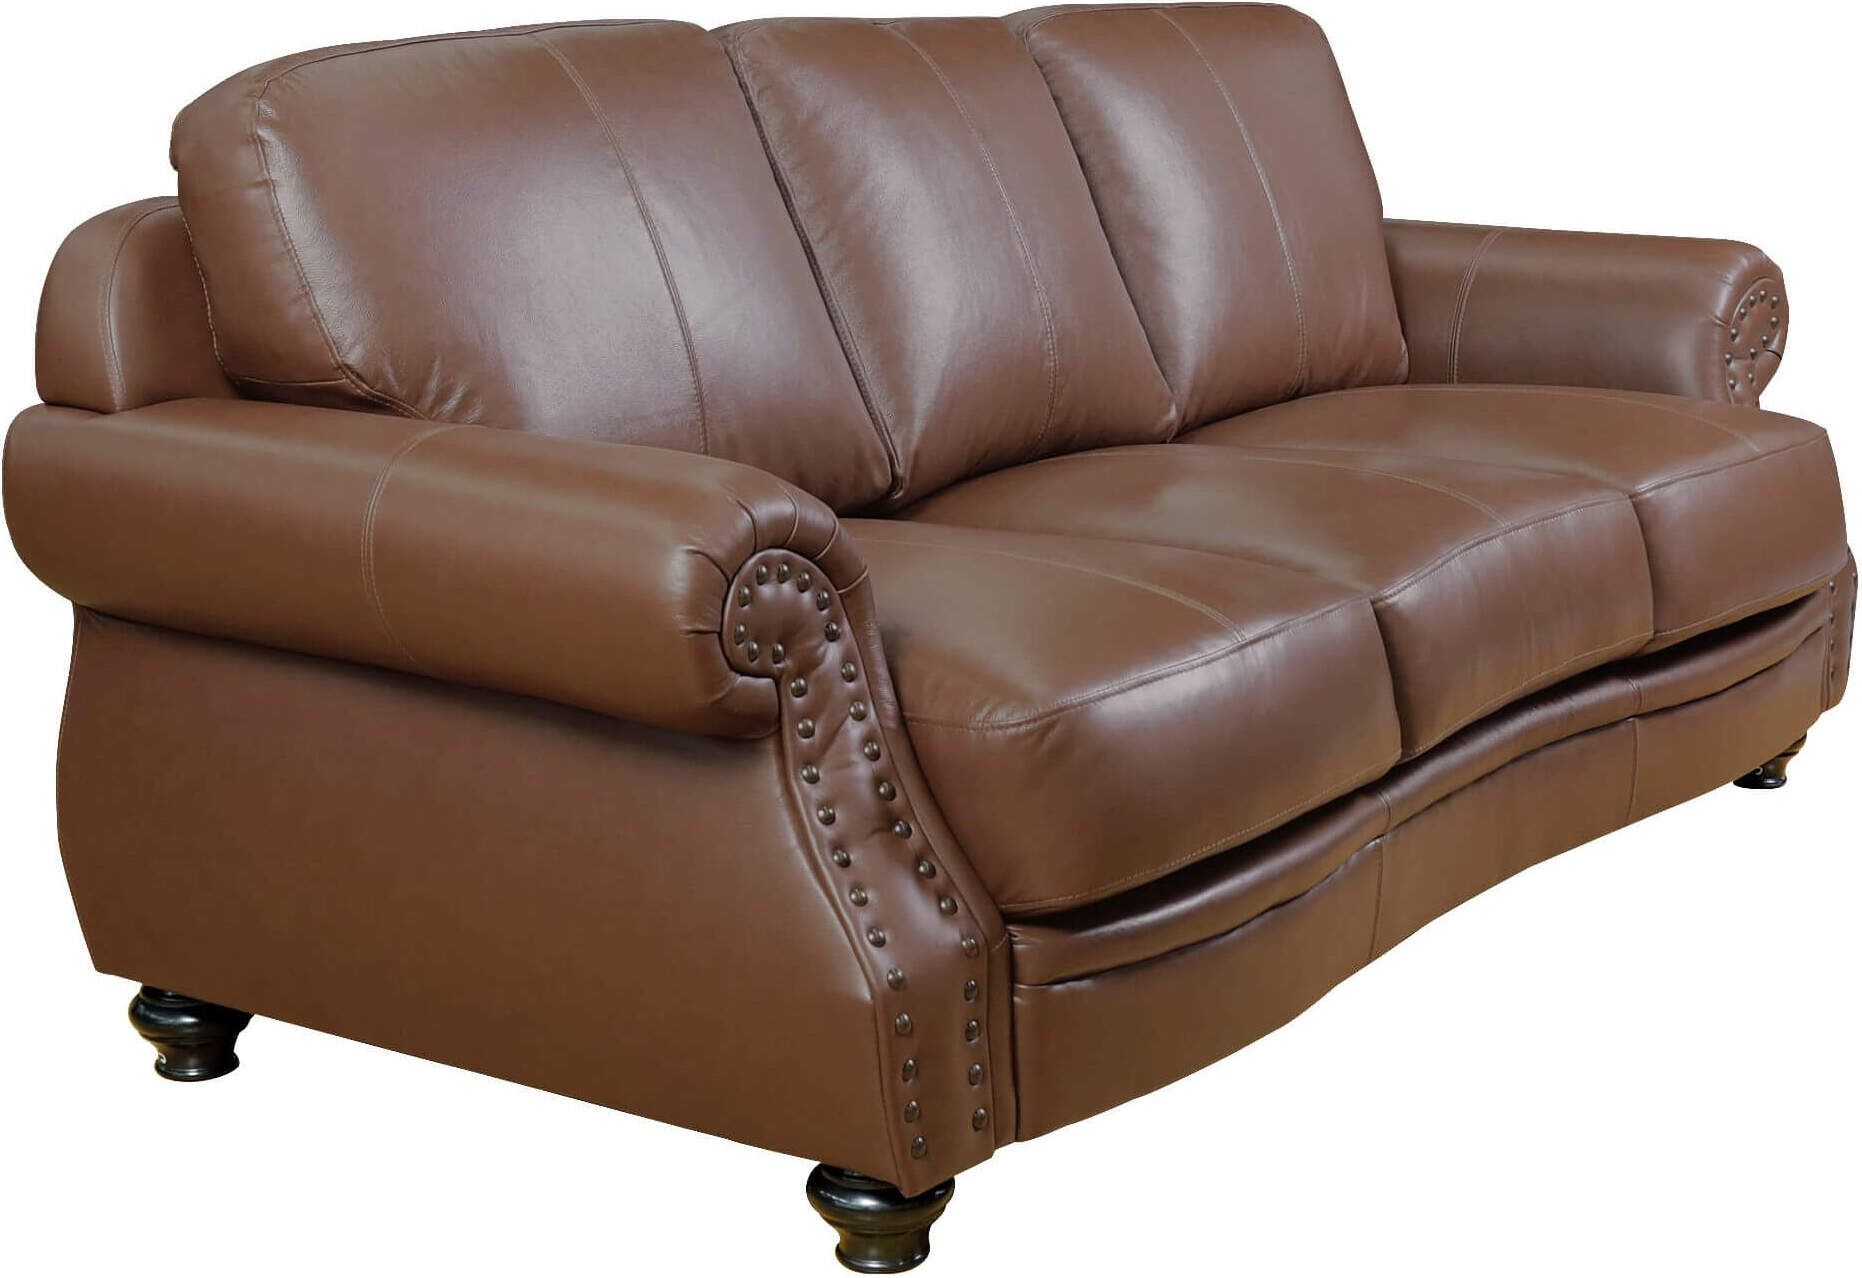 Sunset Trading Charleston 86 Inch Wide Top Grain Leather Sofa Chestnut  Brown 3 Seater Rolled Arm Couch With Nailheads | 1stopbedrooms Regarding Top Grain Leather Loveseats (View 11 of 15)